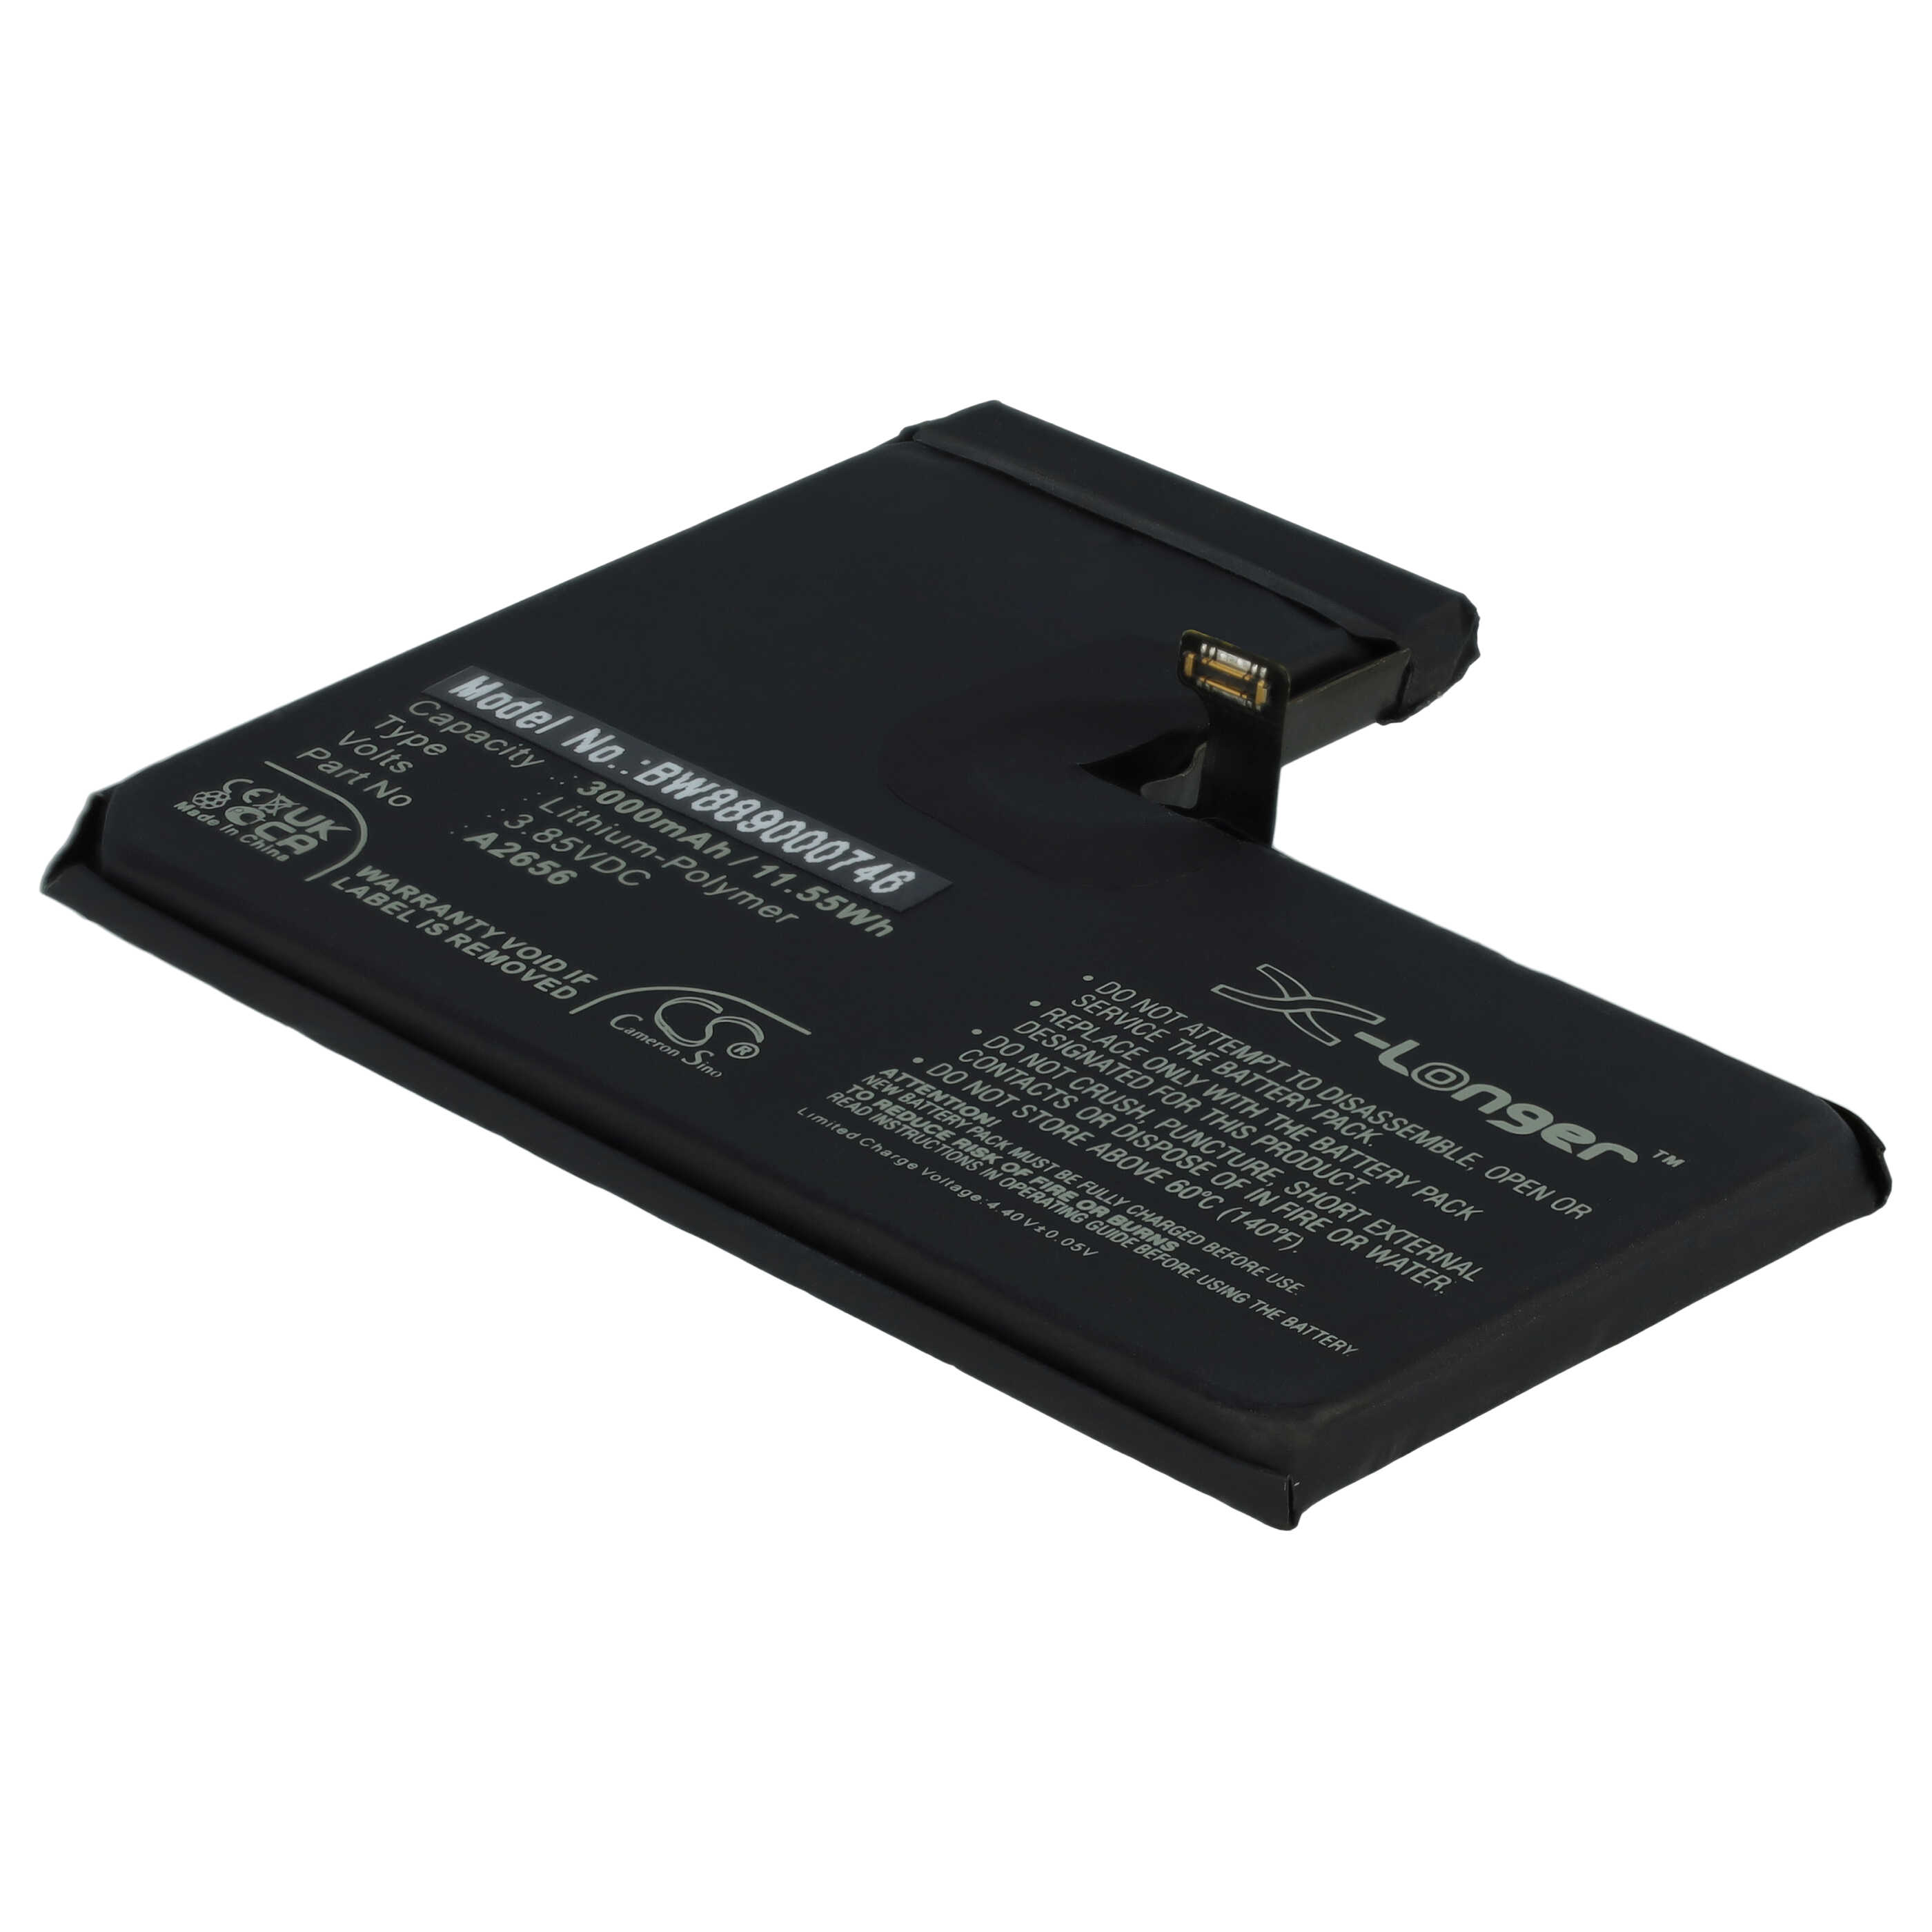 Mobile Phone Battery Replacement for Apple A2656 - 3000mAh 3.85V Li-polymer